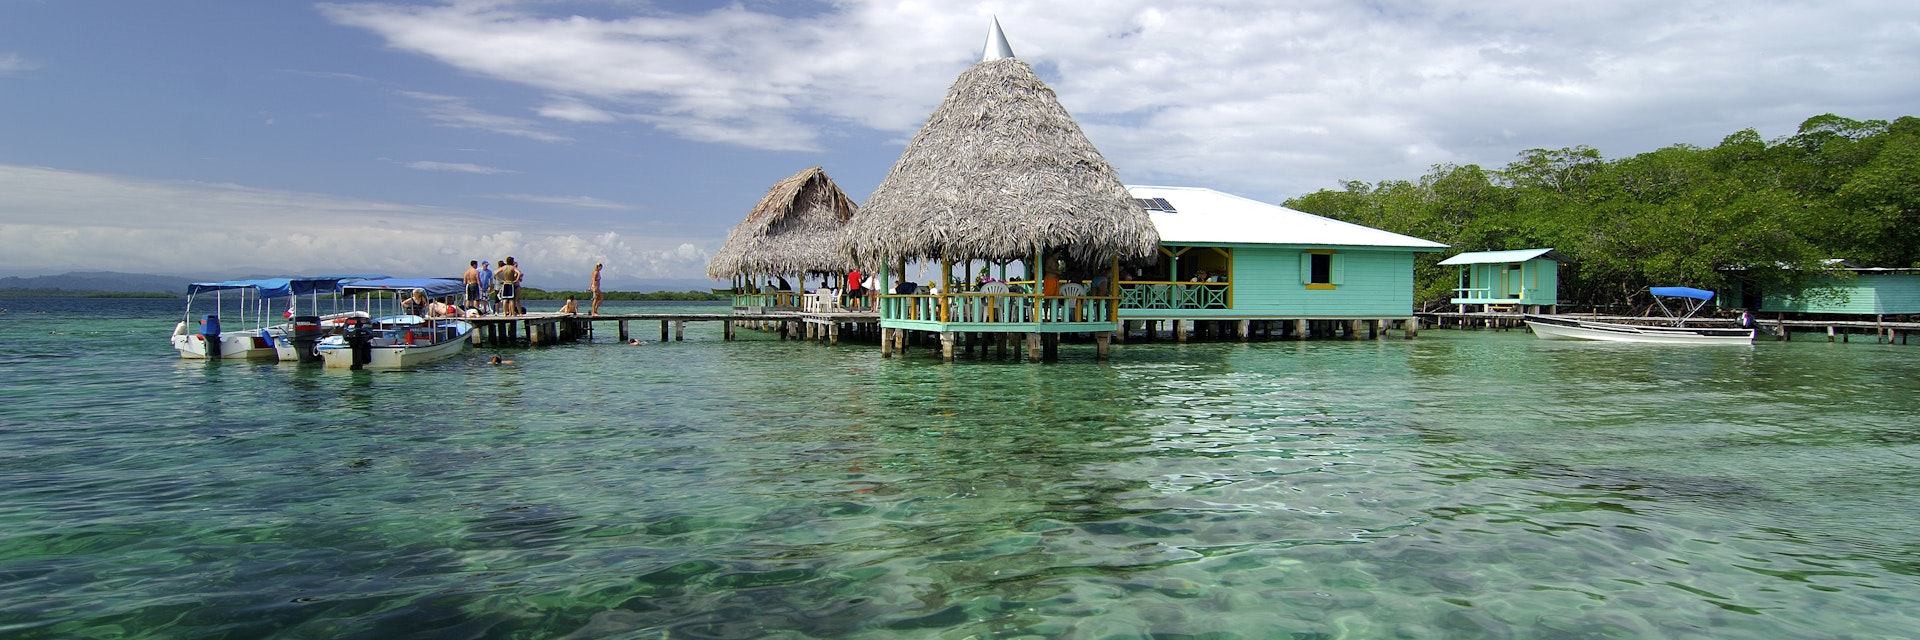 Restaurant on the tropical waters of Coral Key, Bastimentos Marine Park.